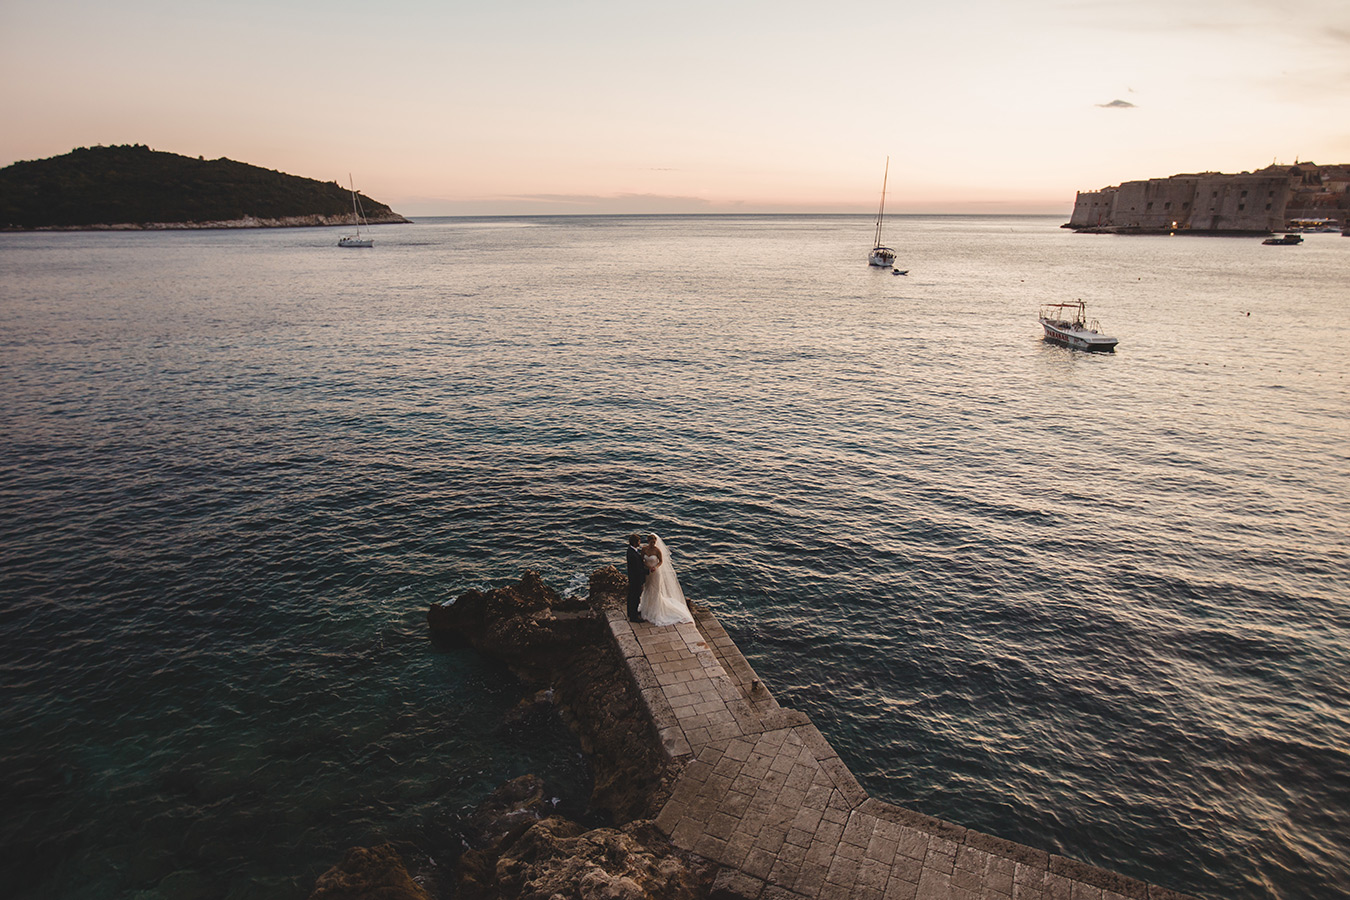 One of a set of images taken at this chic destination Wedding of Jenna & Nick. The stylish old town of Dubrovnik, Croatia.  The couple sit together by the water.  Photography by Matt Porteous